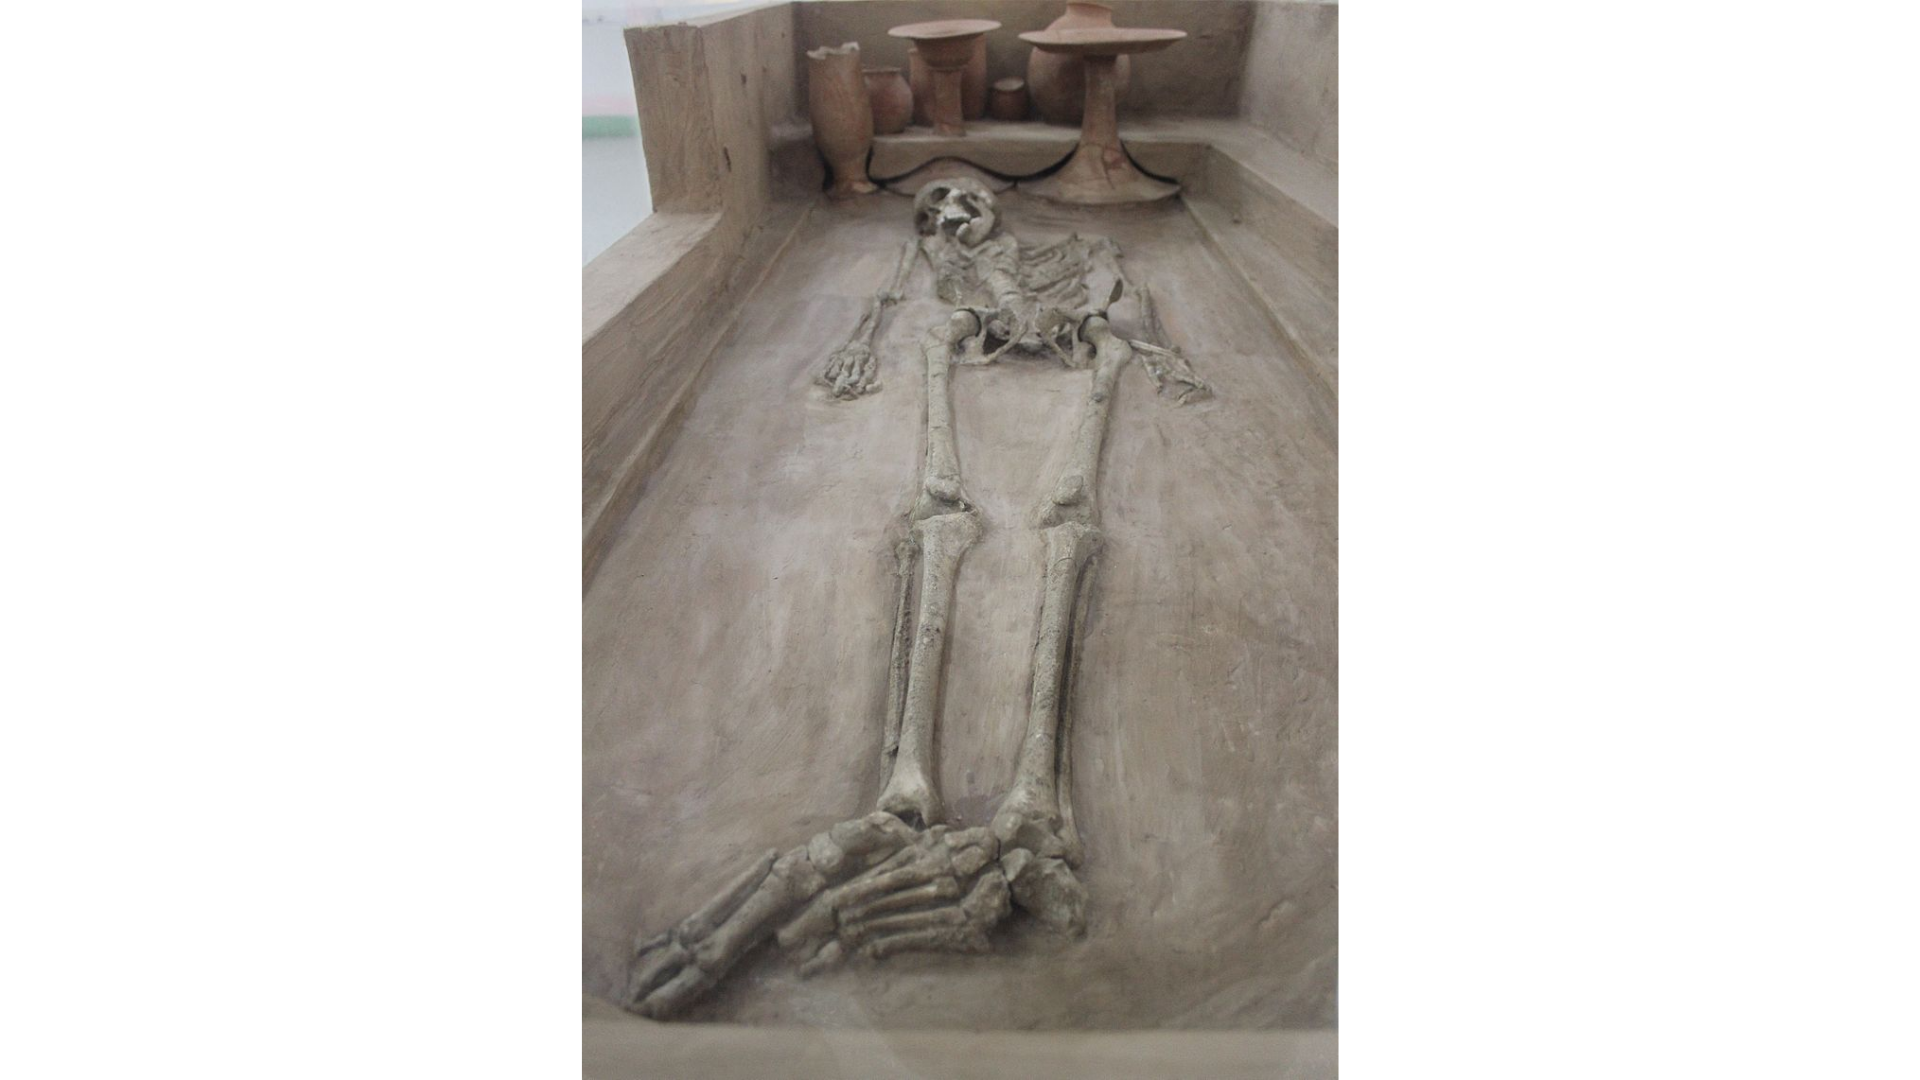 The skeleton of male, part of the "Rakhigarhi love birds" couple, found at Rakhigarhi and now on display in the National Museum | Wikimedia Commons